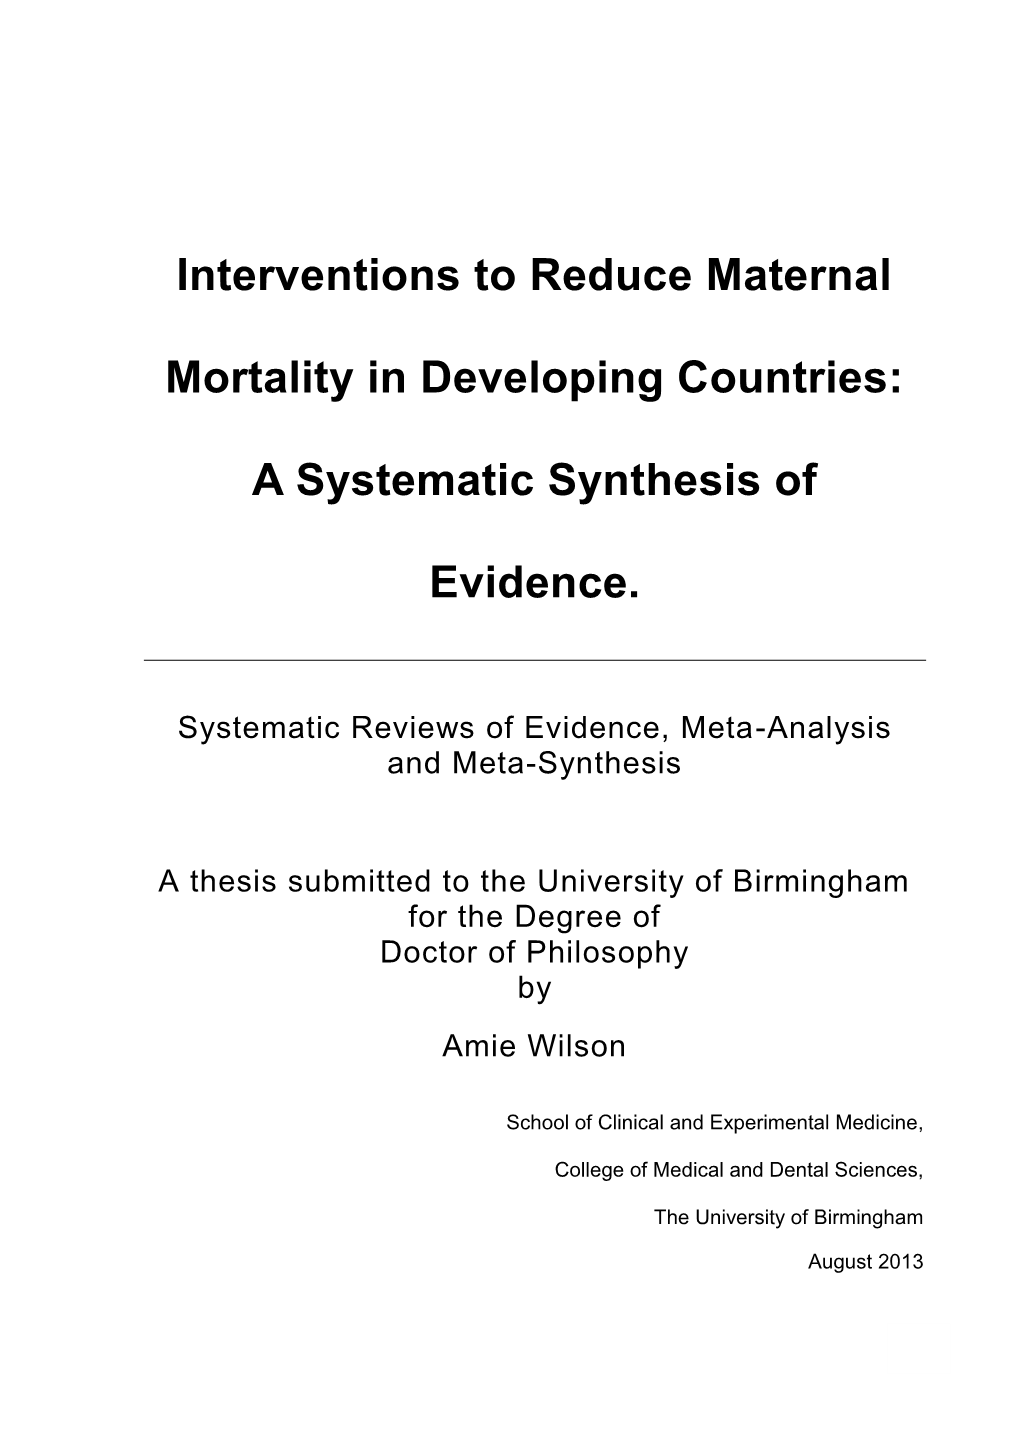 Interventions to Reduce Maternal Mortality in Developing Countries with Meta-Analysis Or Meta-Synthesis Where Appropriate